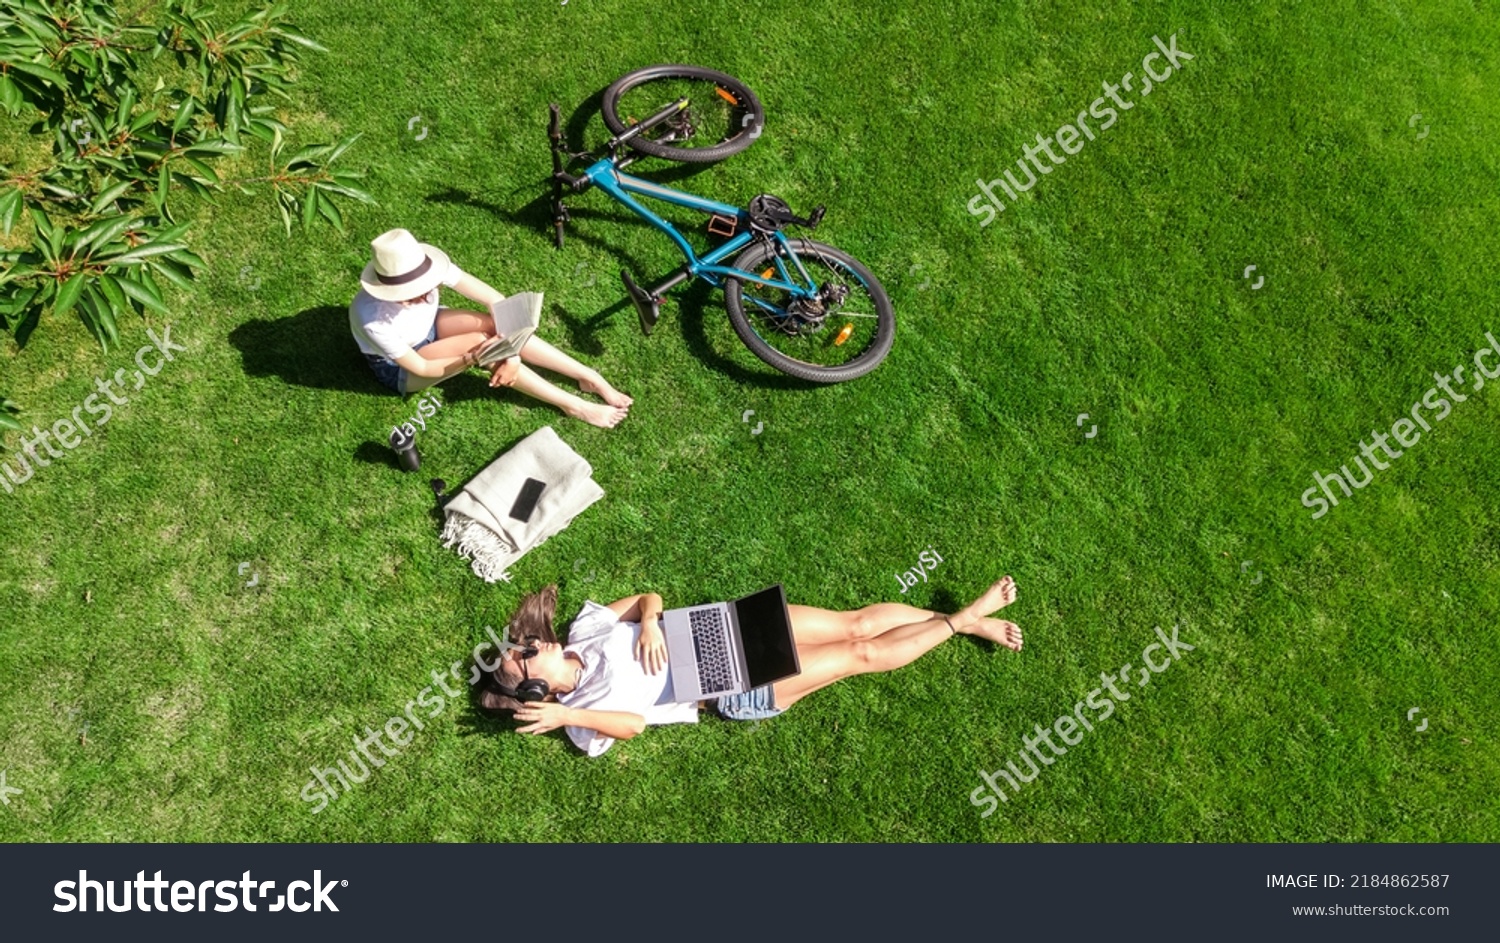 Young girls with bicycle in park, using laptop computer and headphones, two student girls studying online outdoors sitting on grass near bike, aerial drone view from above #2184862587